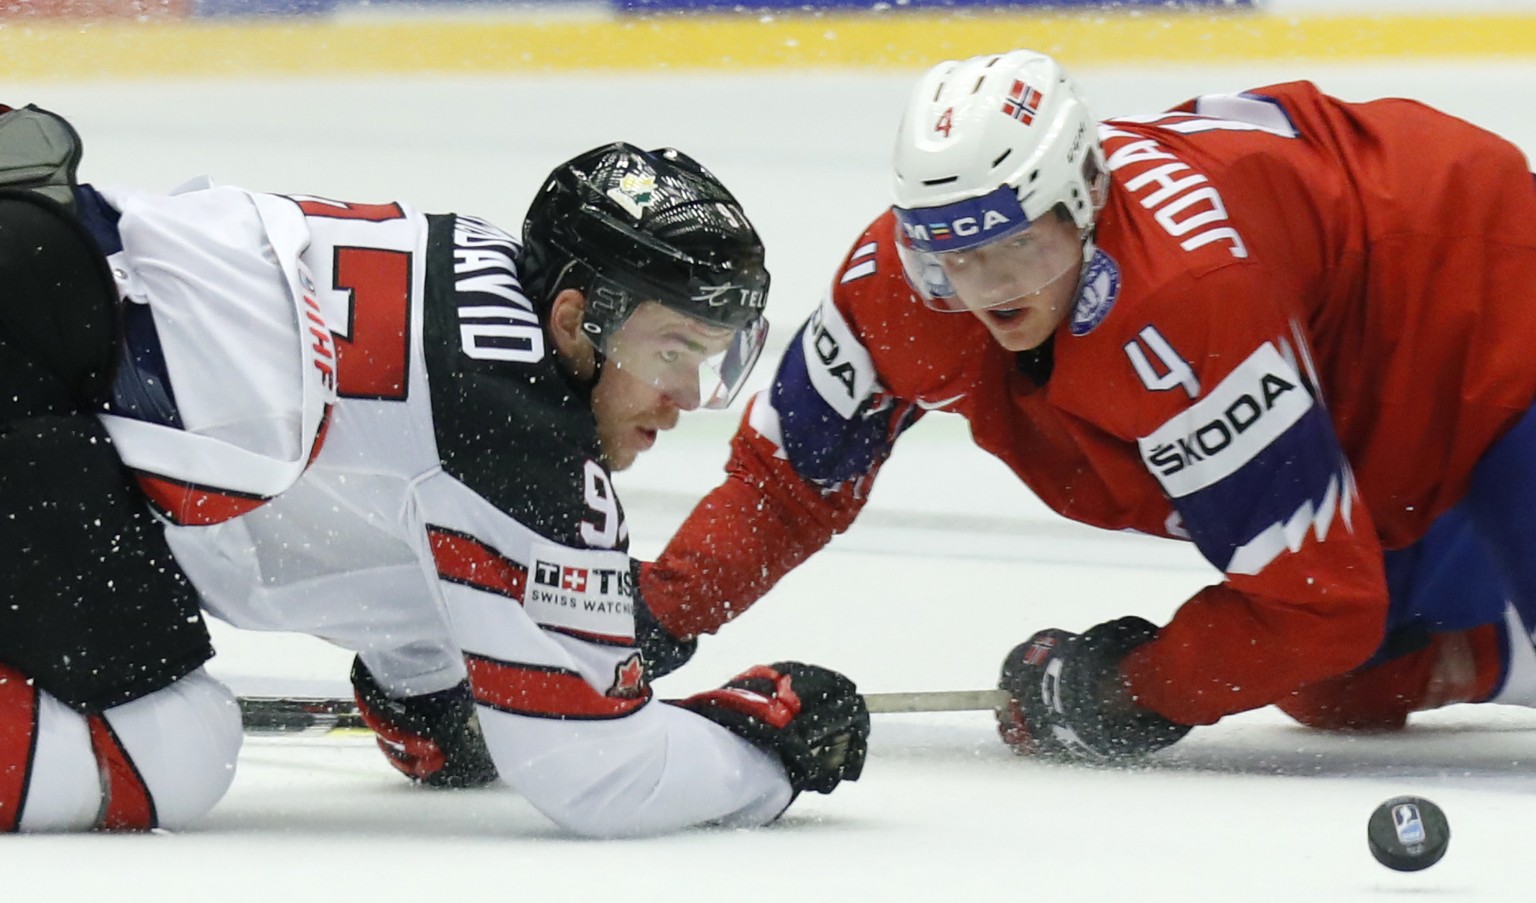 Canada&#039;s Connor McDavid, left, challenges for the puck with Norway&#039;s Johannes Johannesen, right, during the Ice Hockey World Championships group B match between Norway and Canada at the Jysk ...